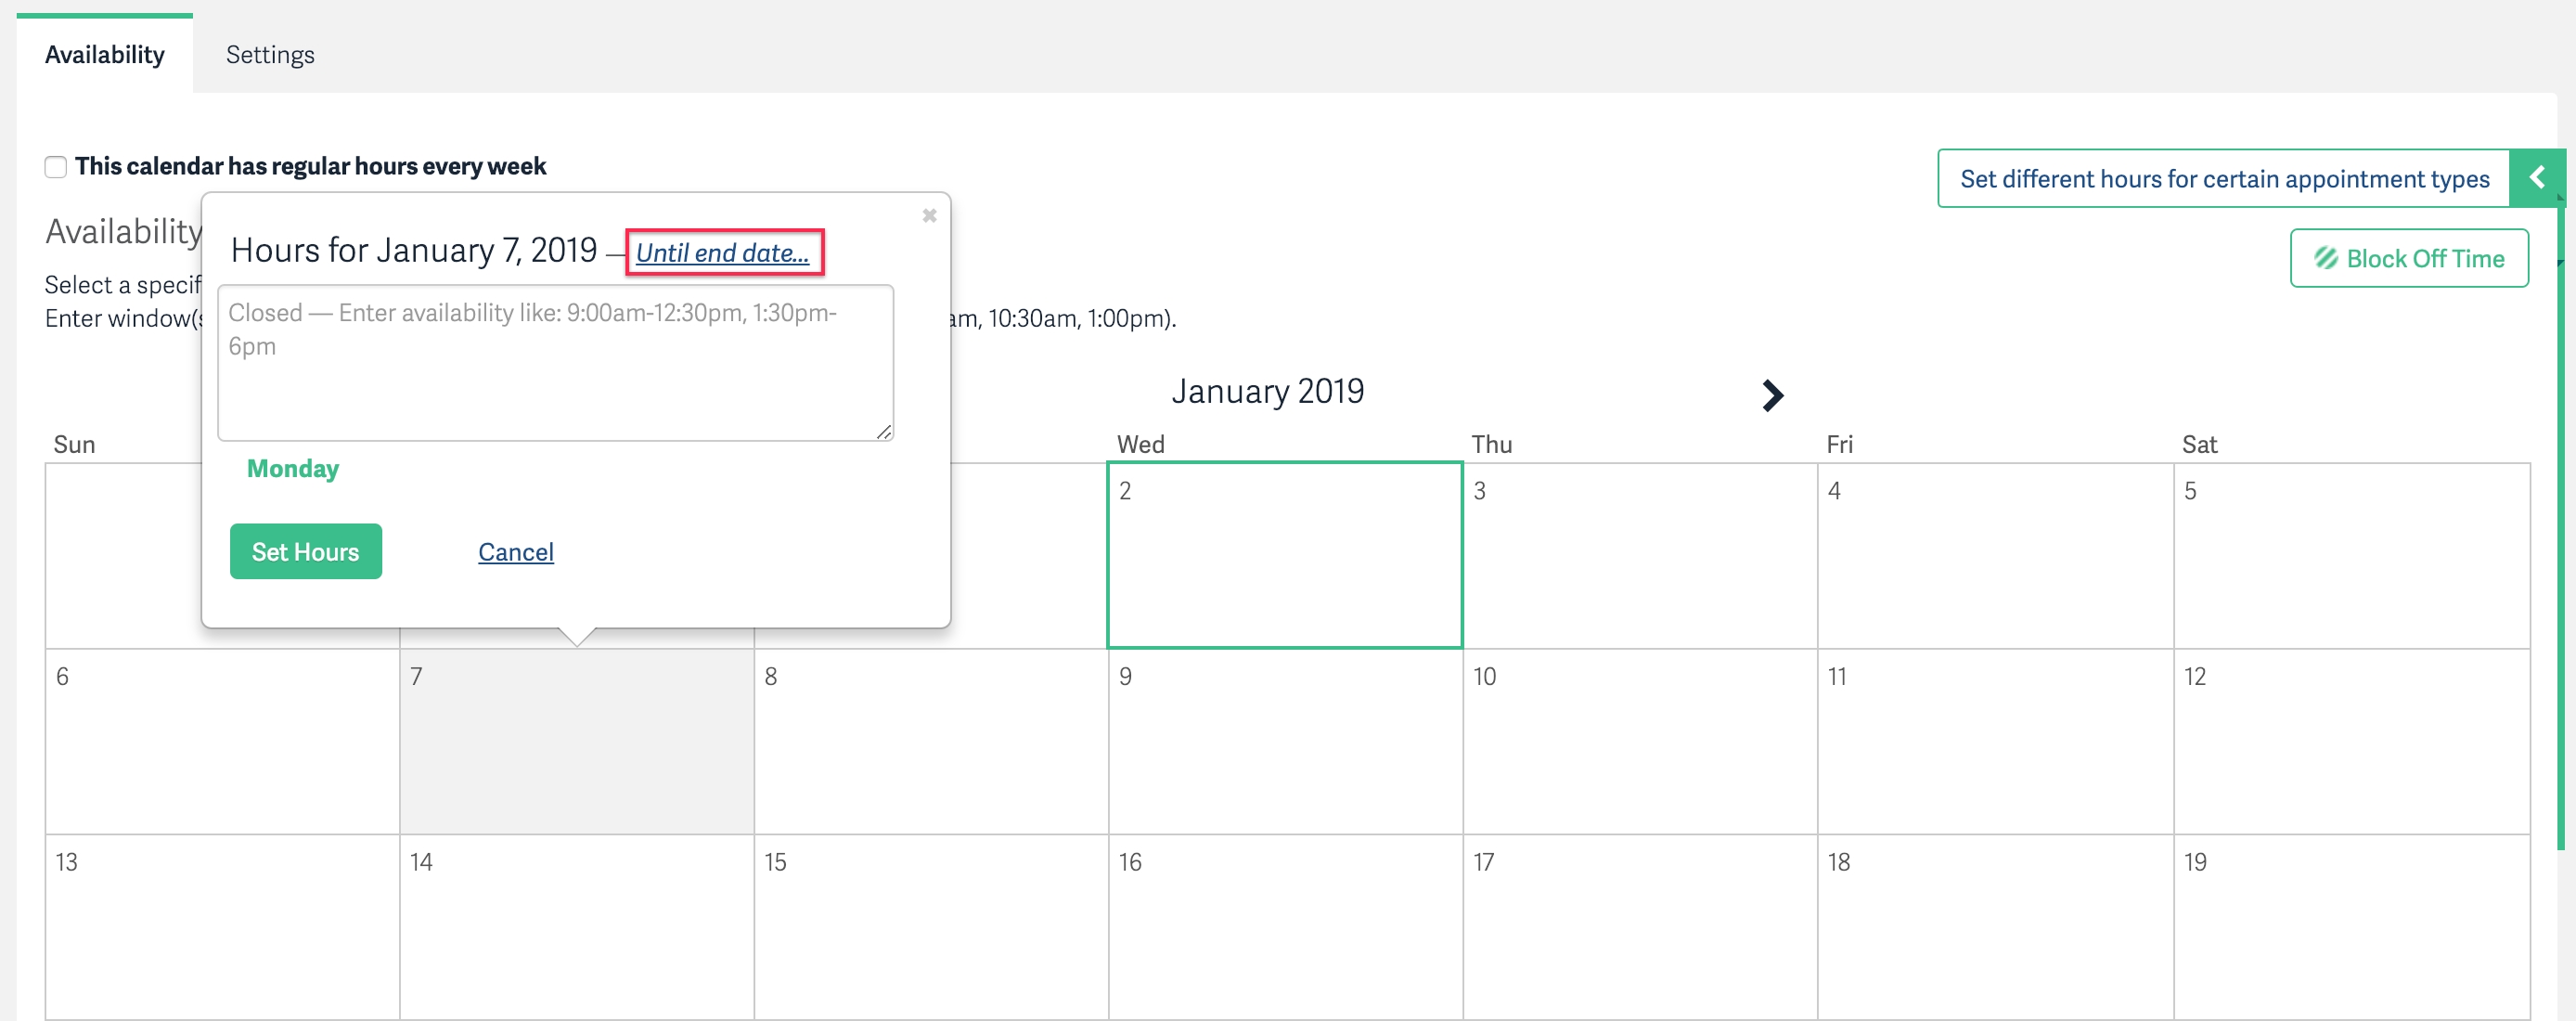 Alternating Hours Every Other Week – Acuity Scheduling